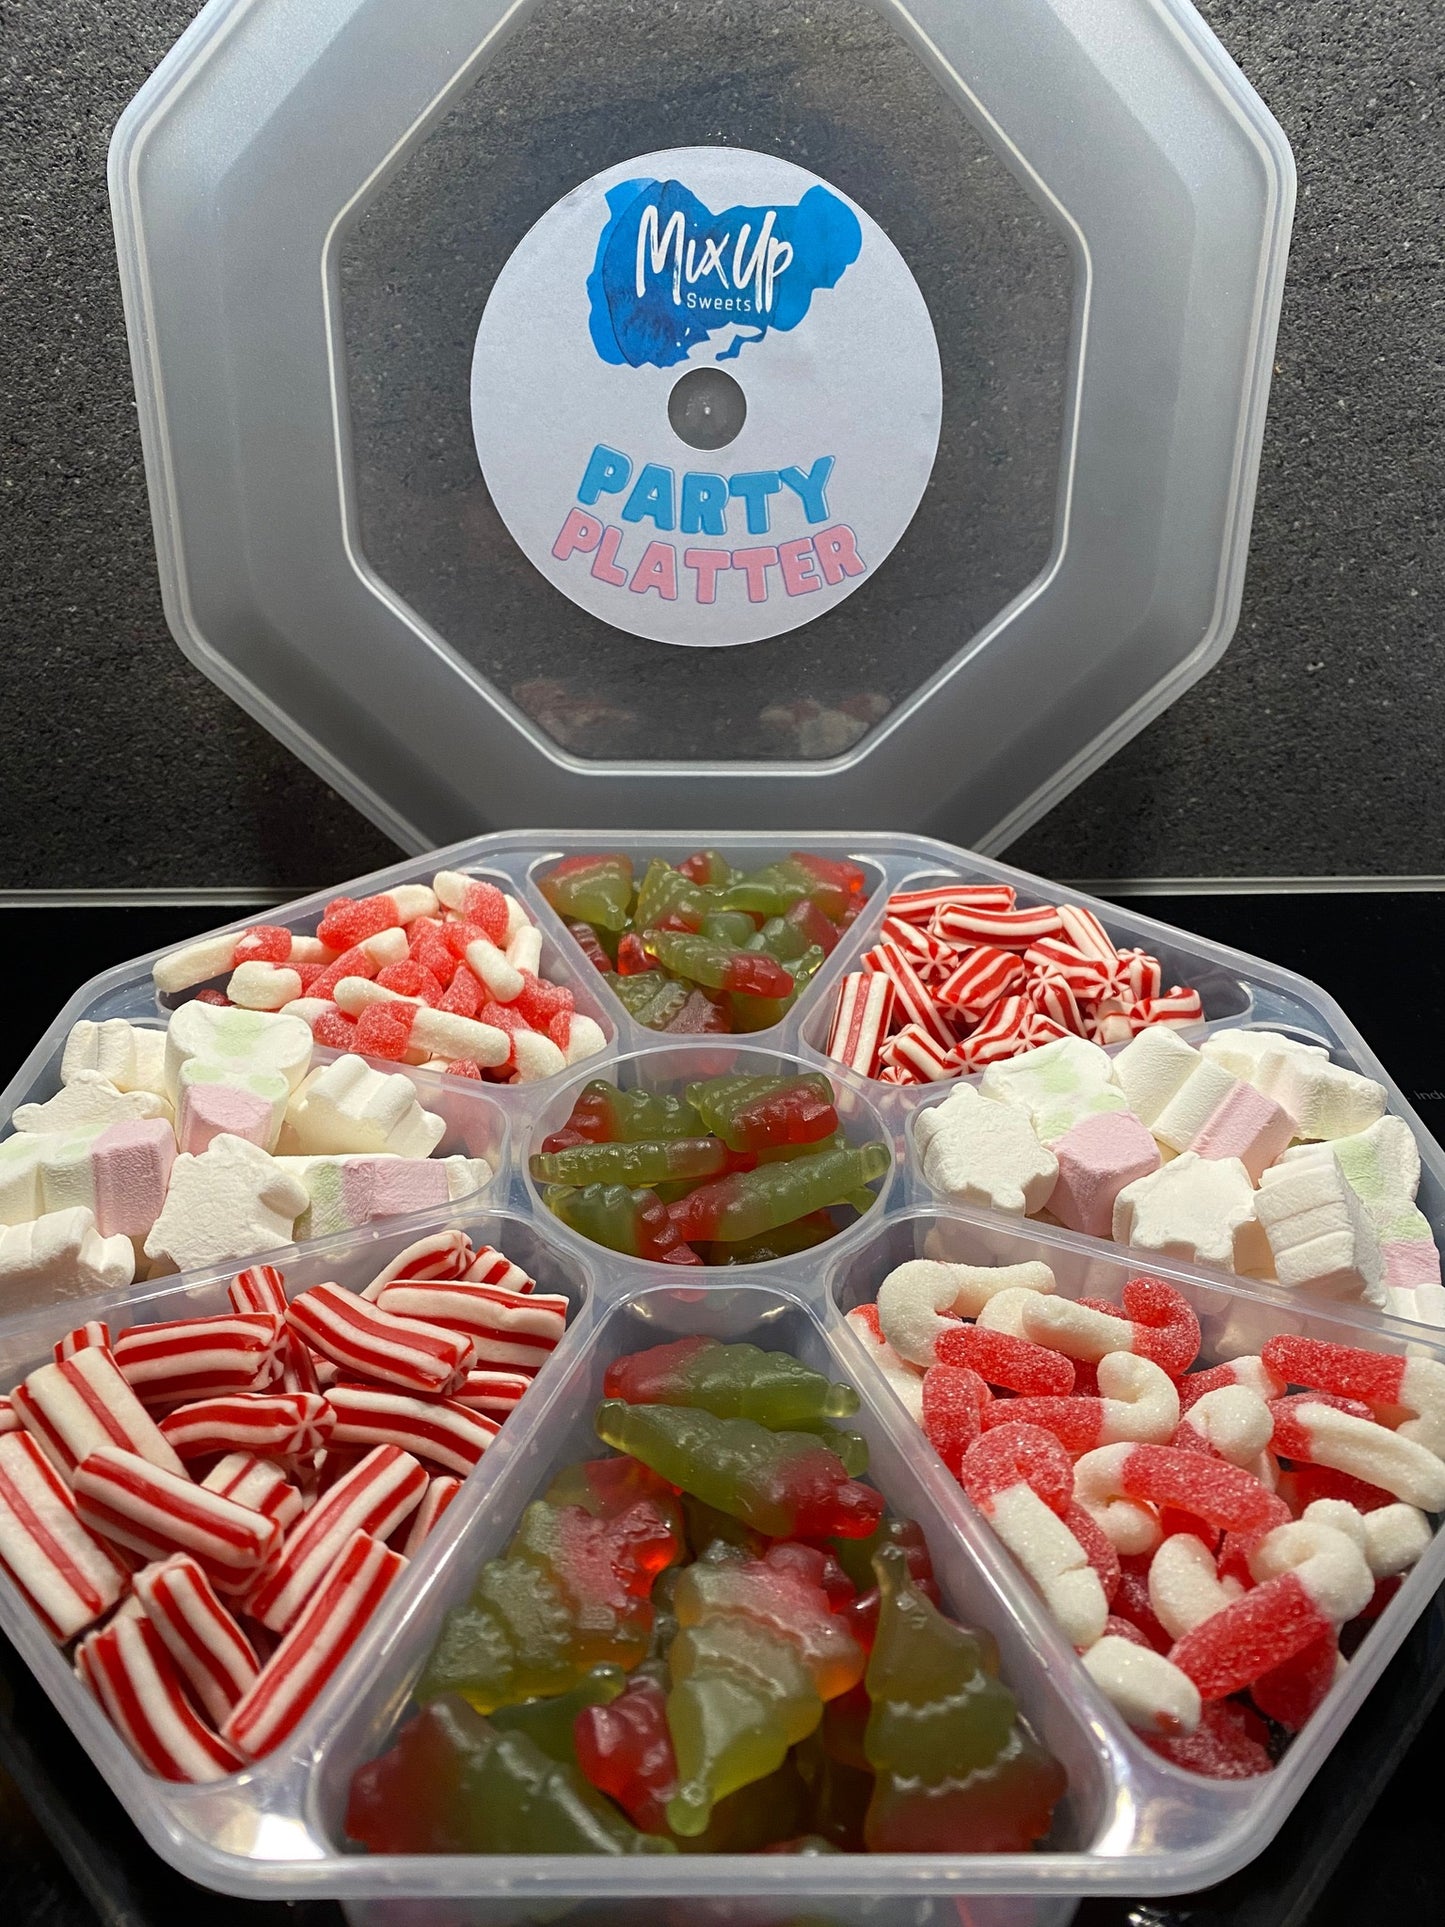 Party Platter - choose your own